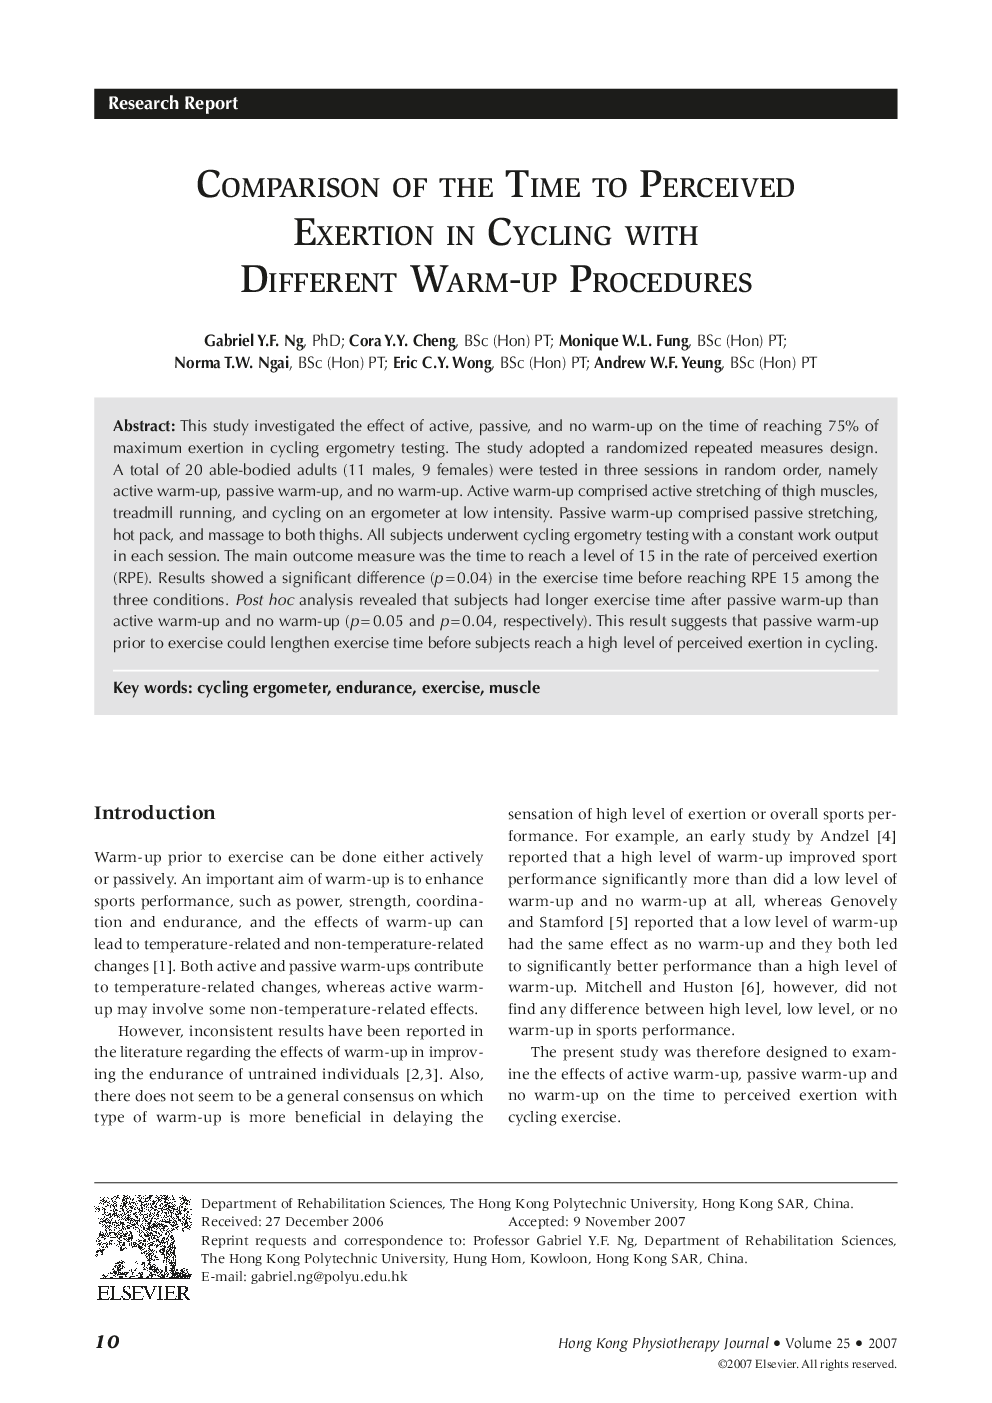 Comparison of the Time to Perceived Exertion in Cycling with Different Warm-Up Procedures